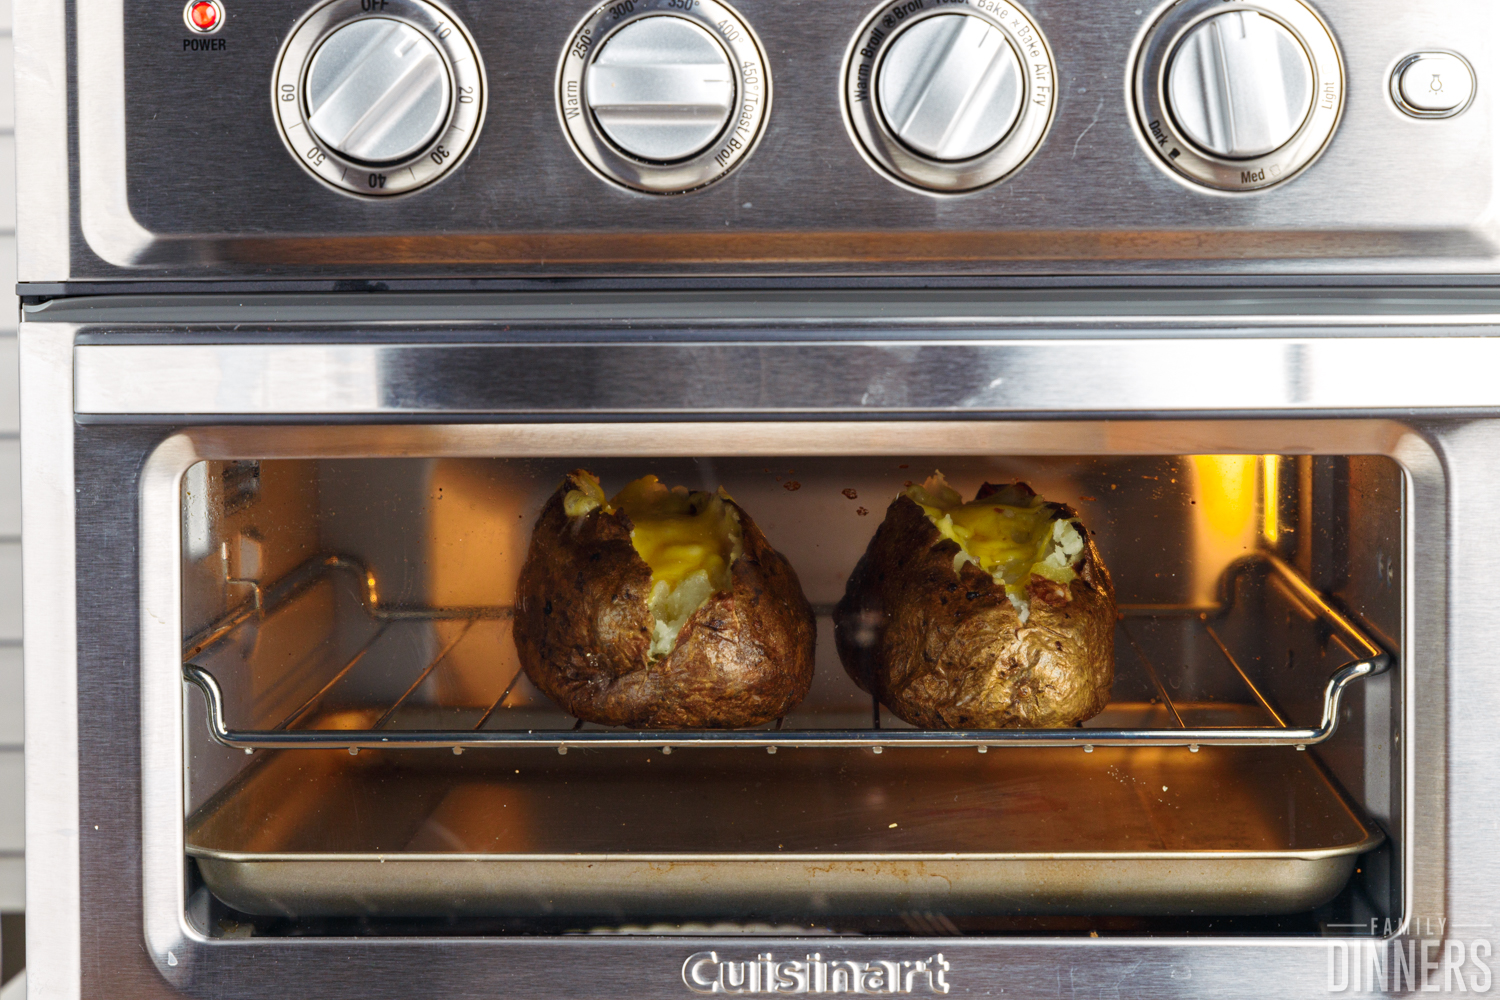 baked potatoes in the toaster oven loaded with cheese